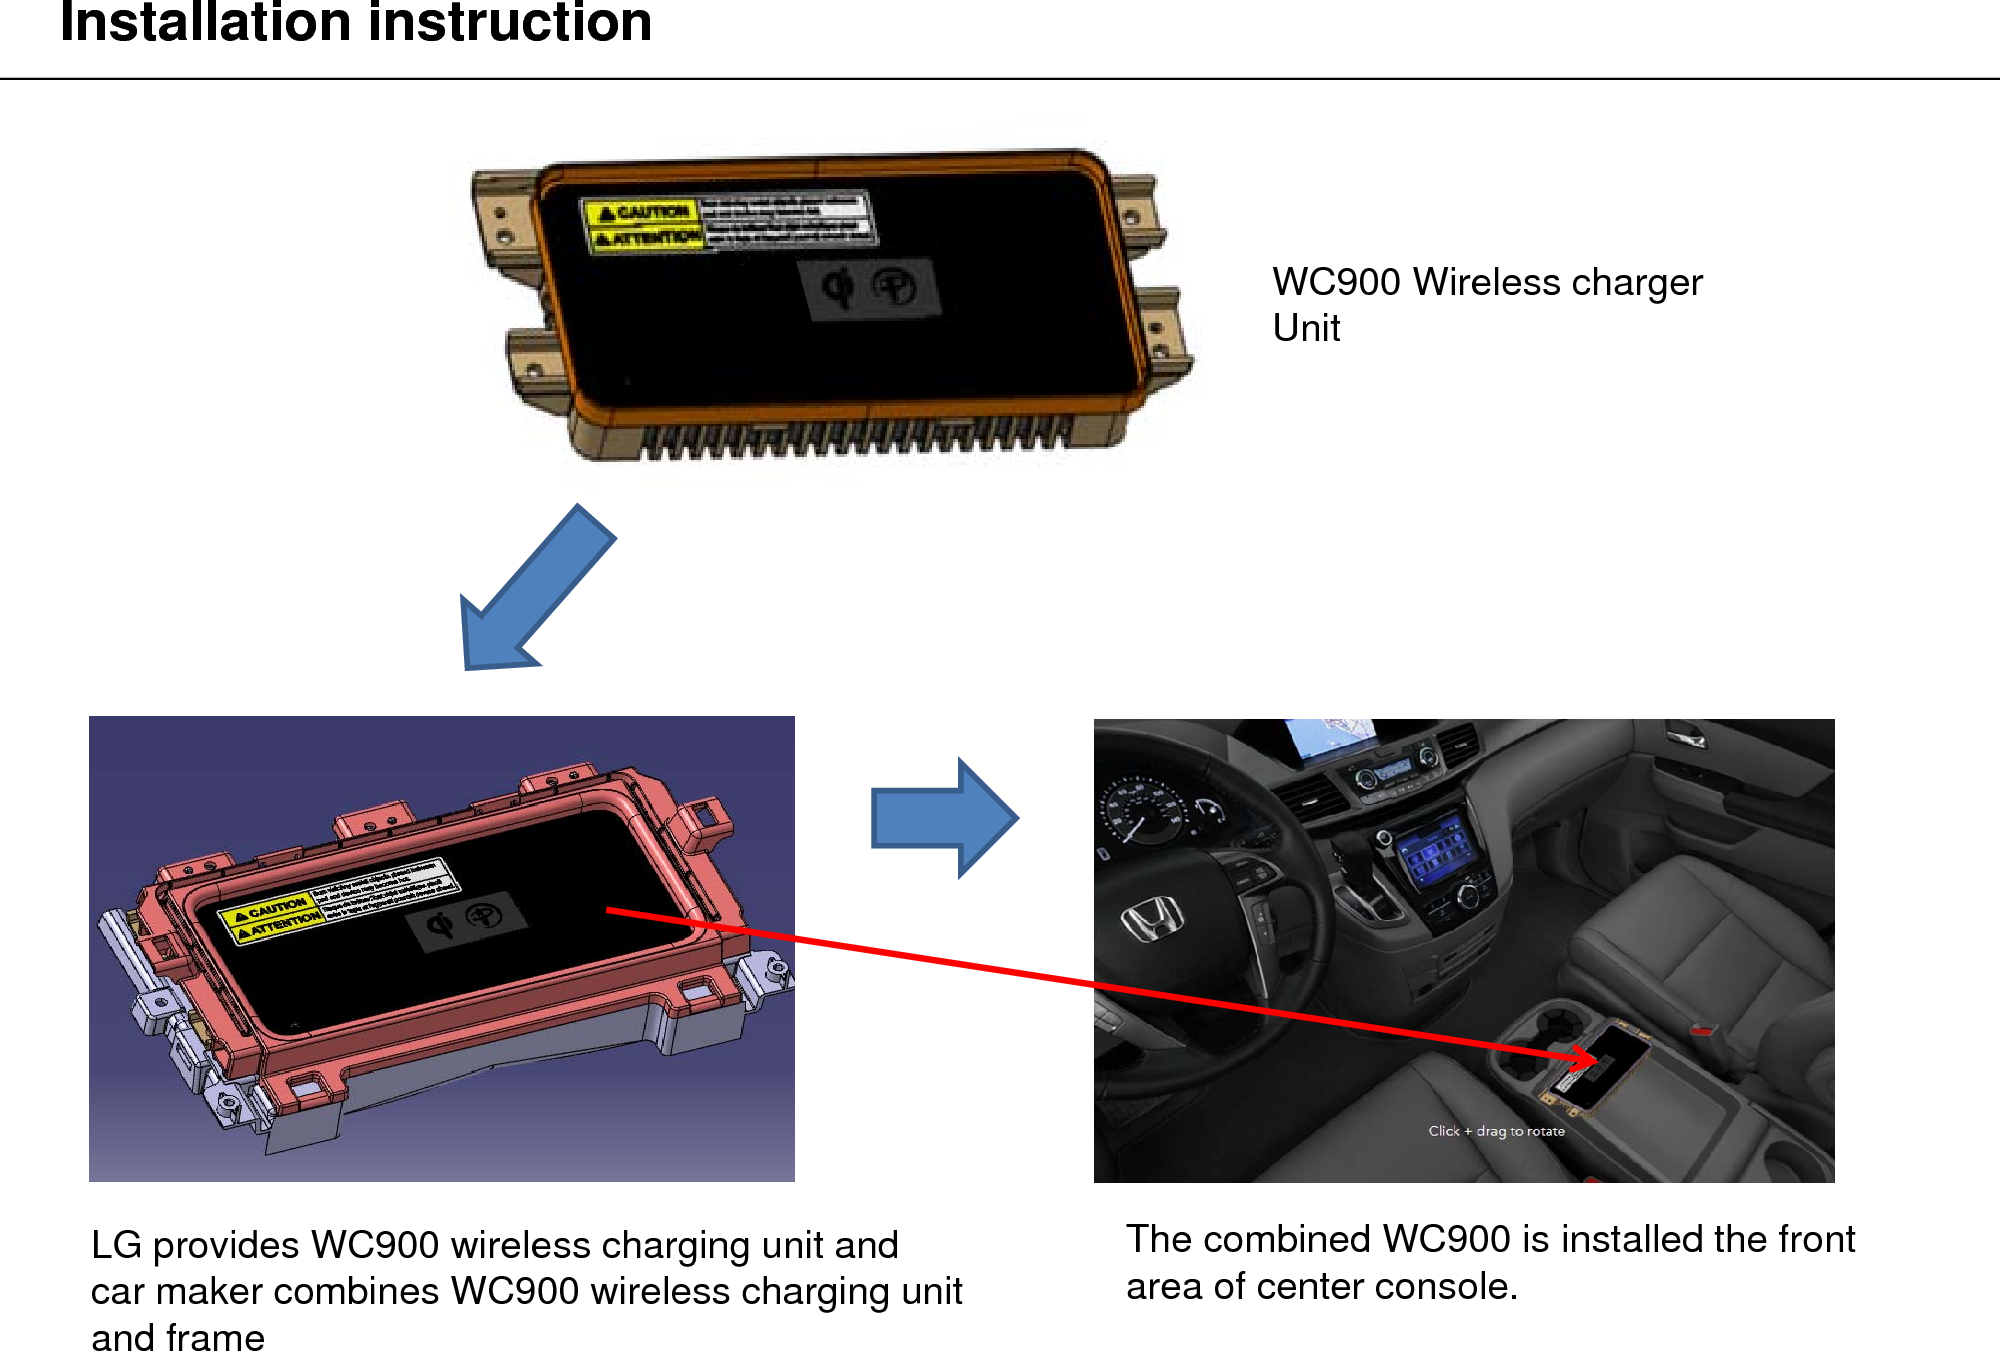 WC900 Wireless charger UnitLG provides WC900 wireless charging unit and car maker combines WC900 wireless charging unit and frame  The combined WC900 is installed the front area of center console.Installation instruction